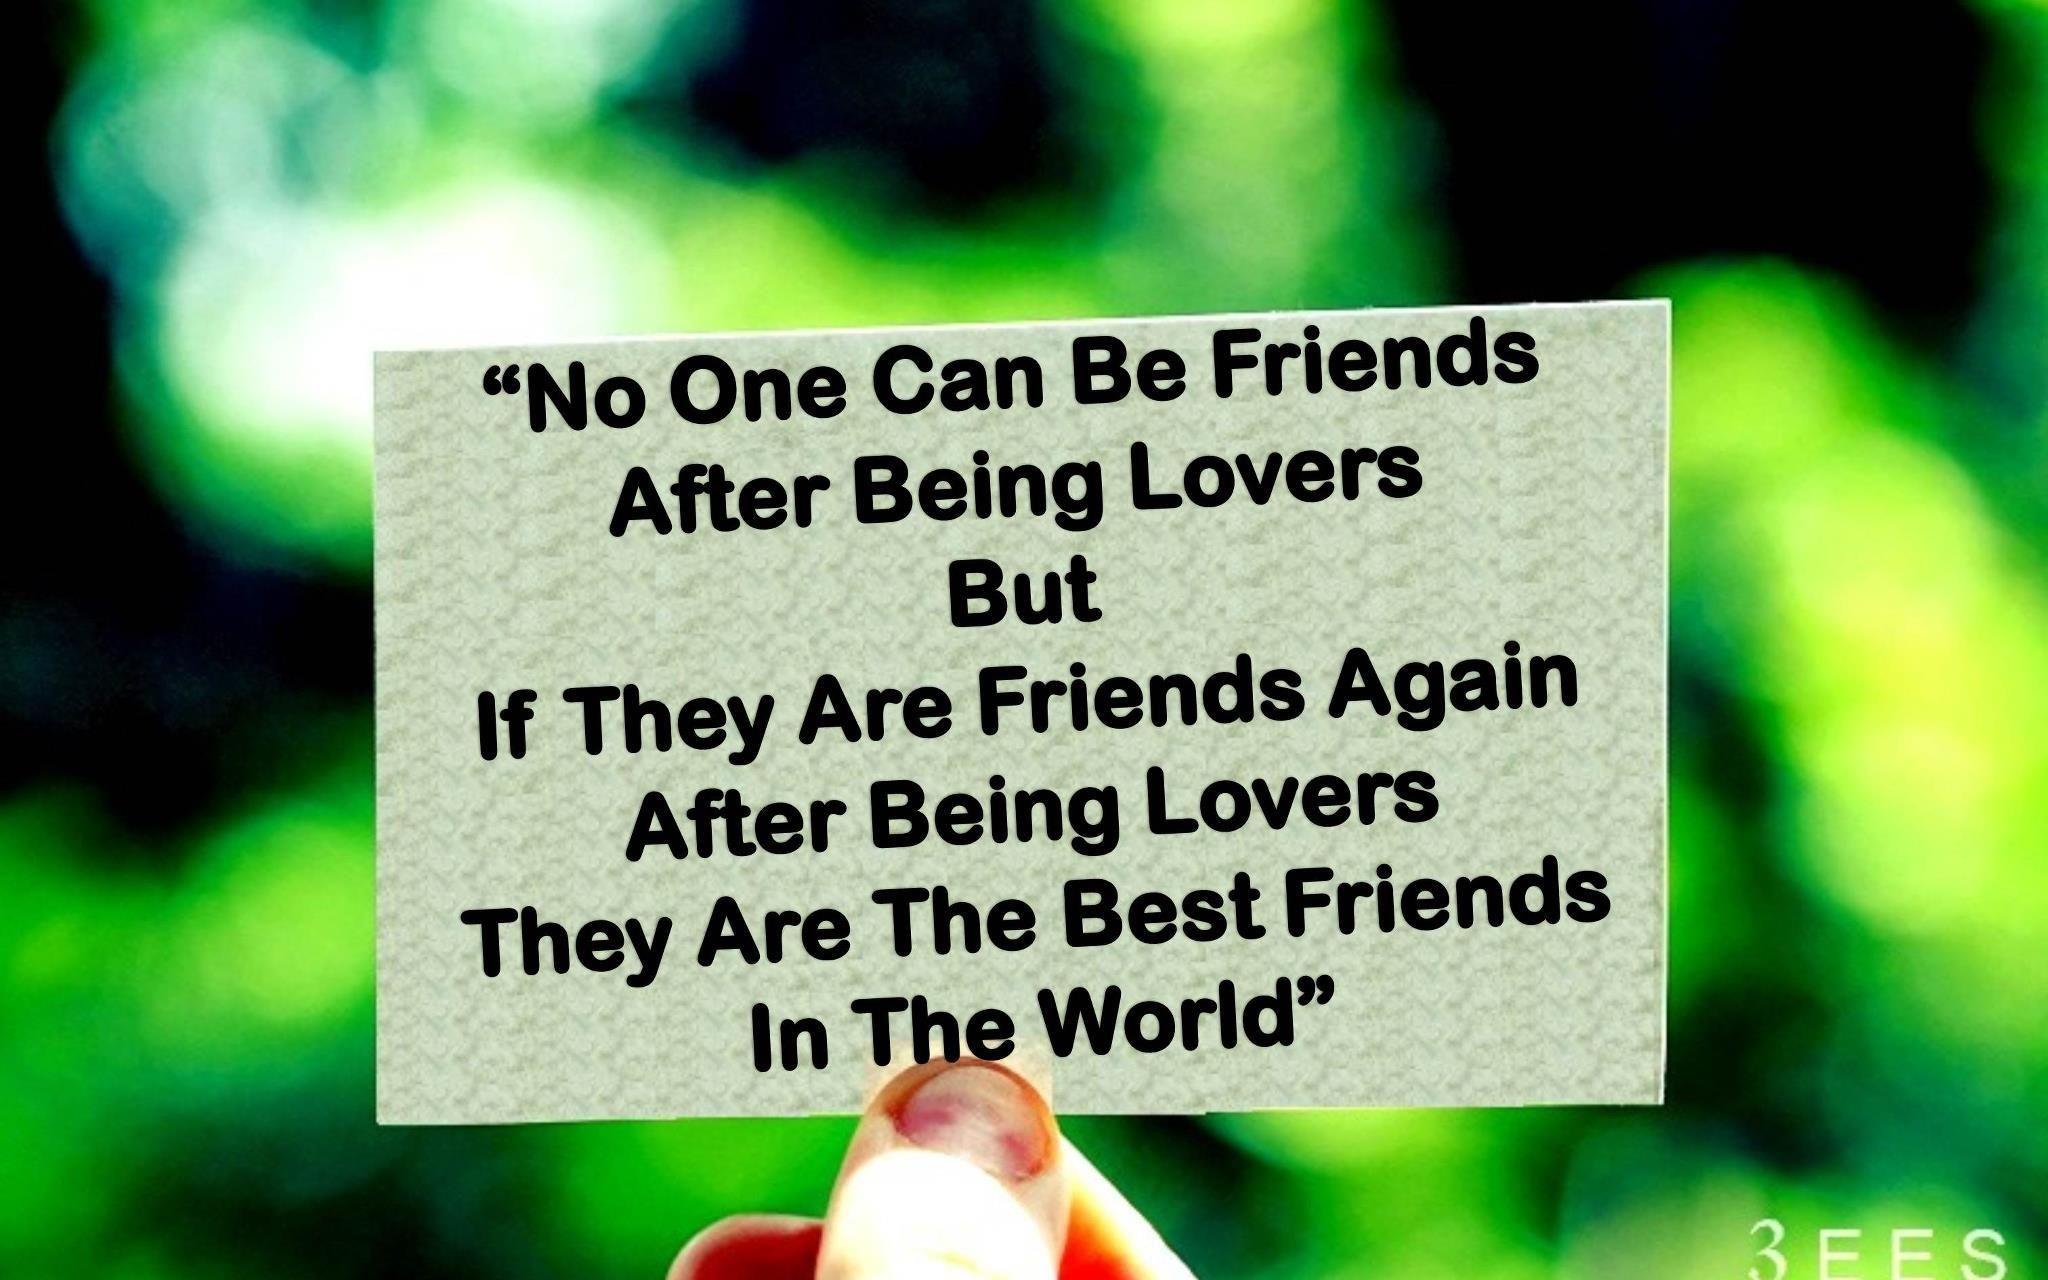 Friendship Image And Quotes Cute Friendship Quotes With Image